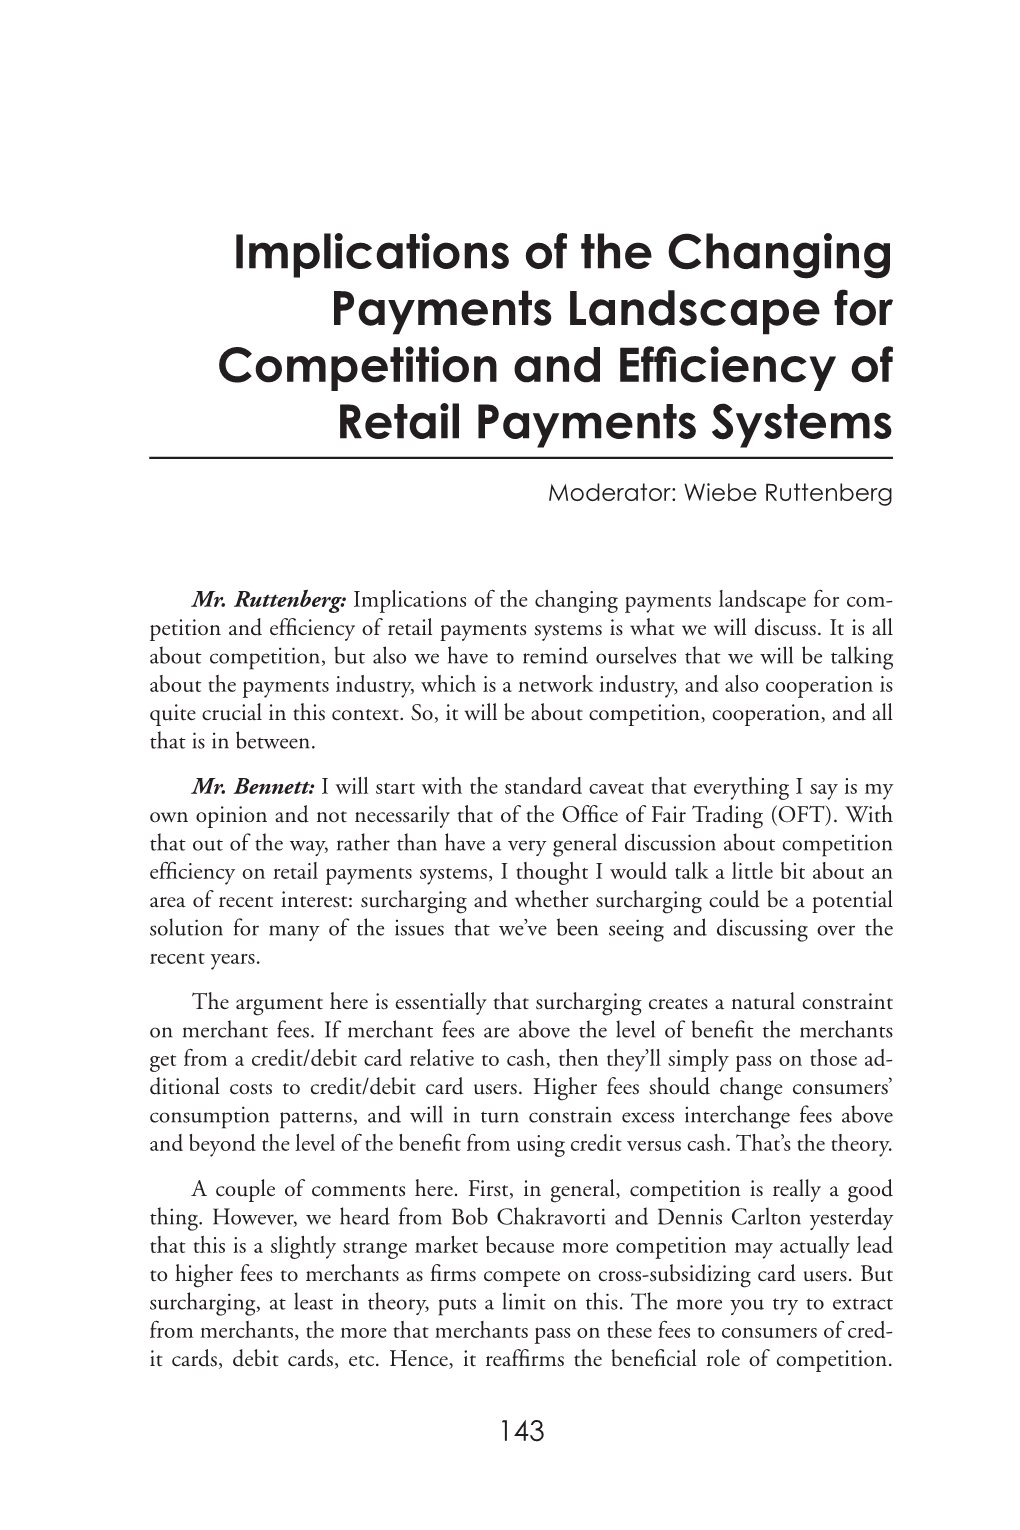 Implications of the Changing Payments Landscape for Competition and Efficiency of Retail Payments Systems